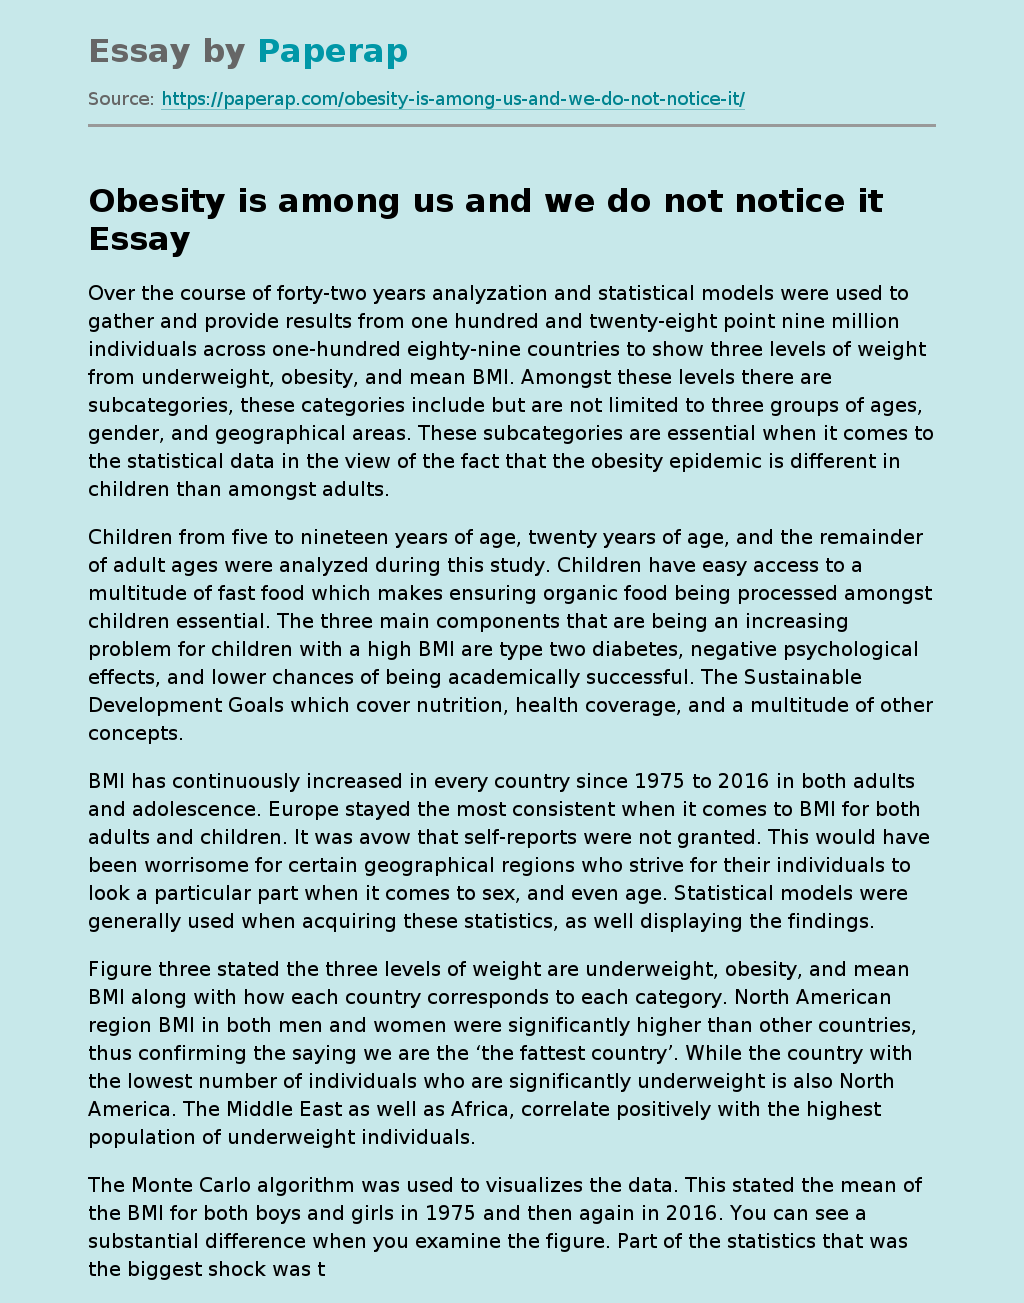 Obesity is among us and we do not notice it